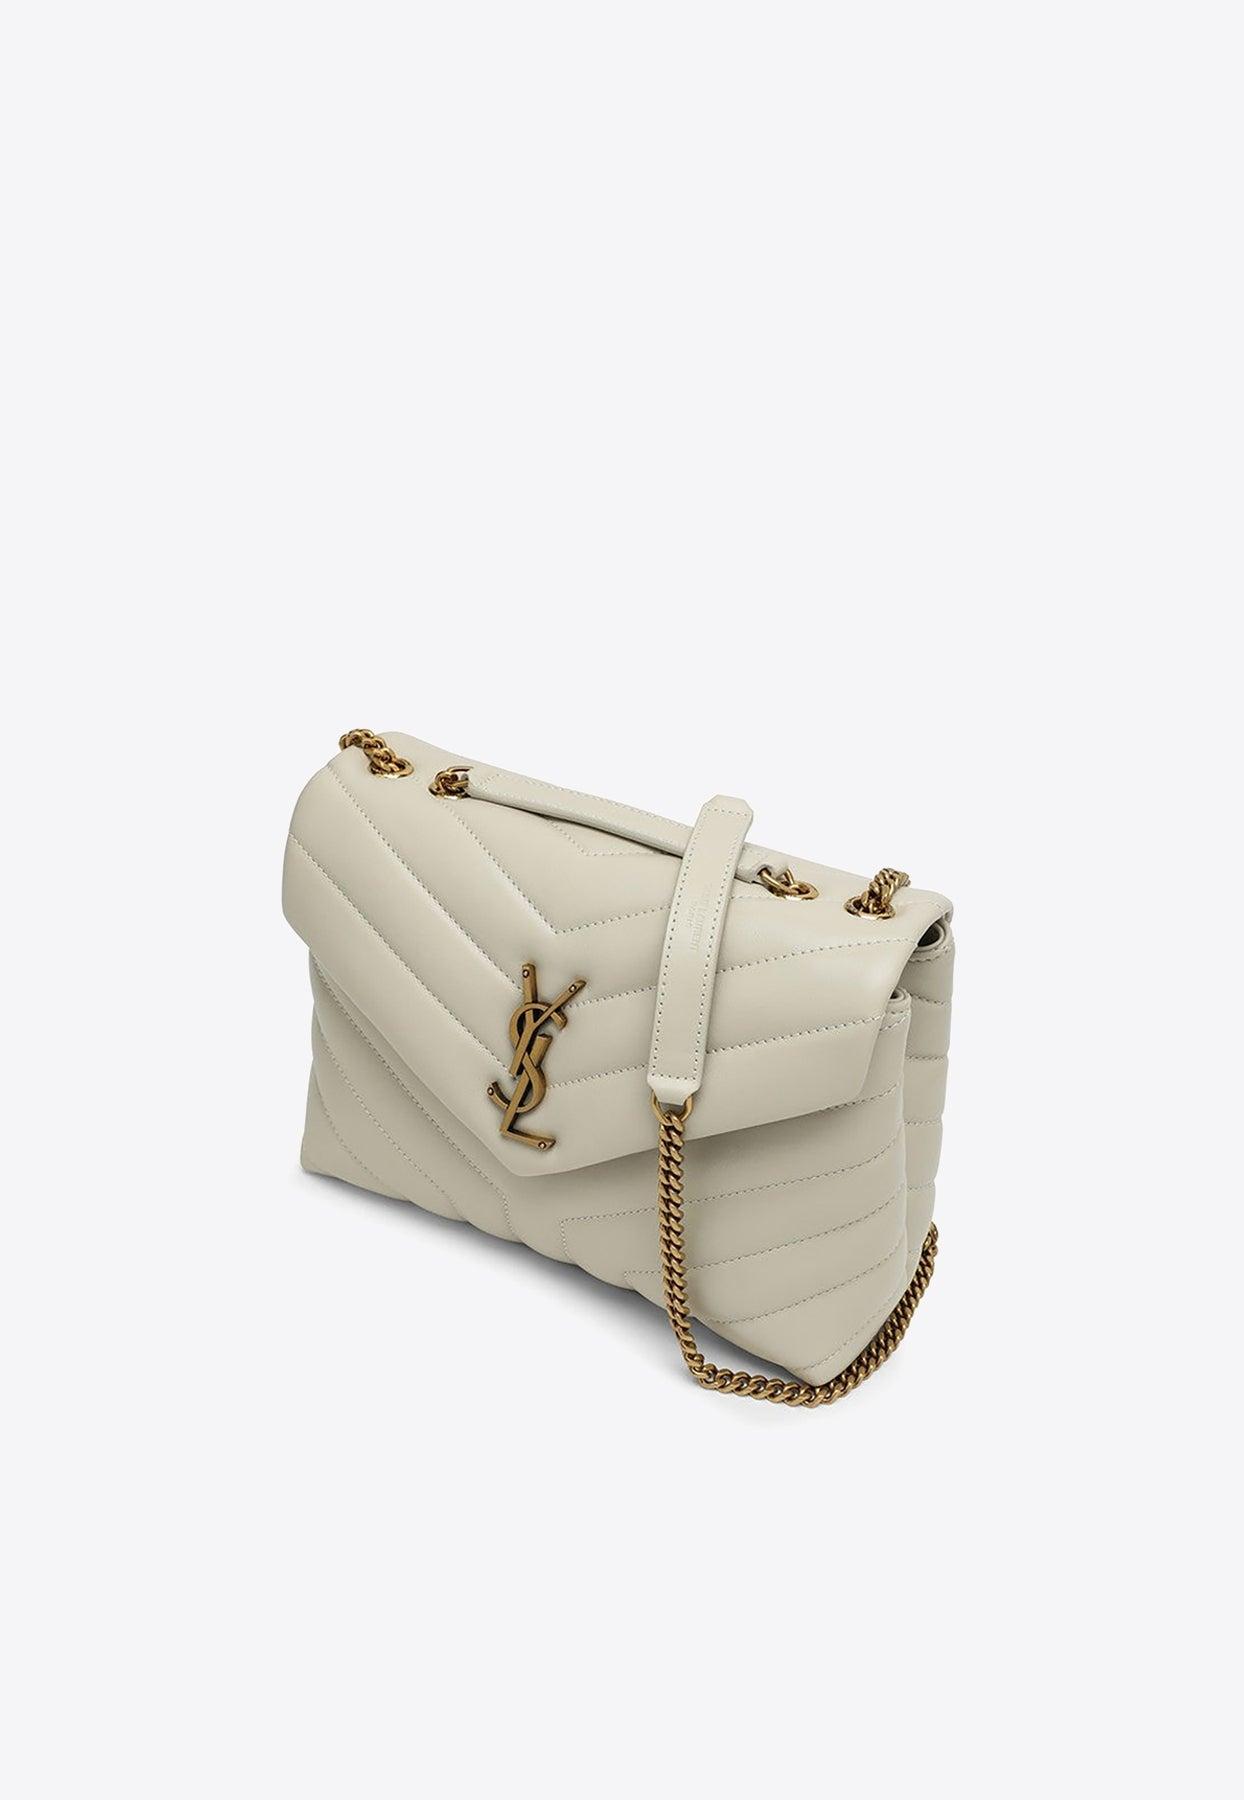 WOMAN SAINT LAURENT WHITE LEATHER LOULOU SMALL BAG